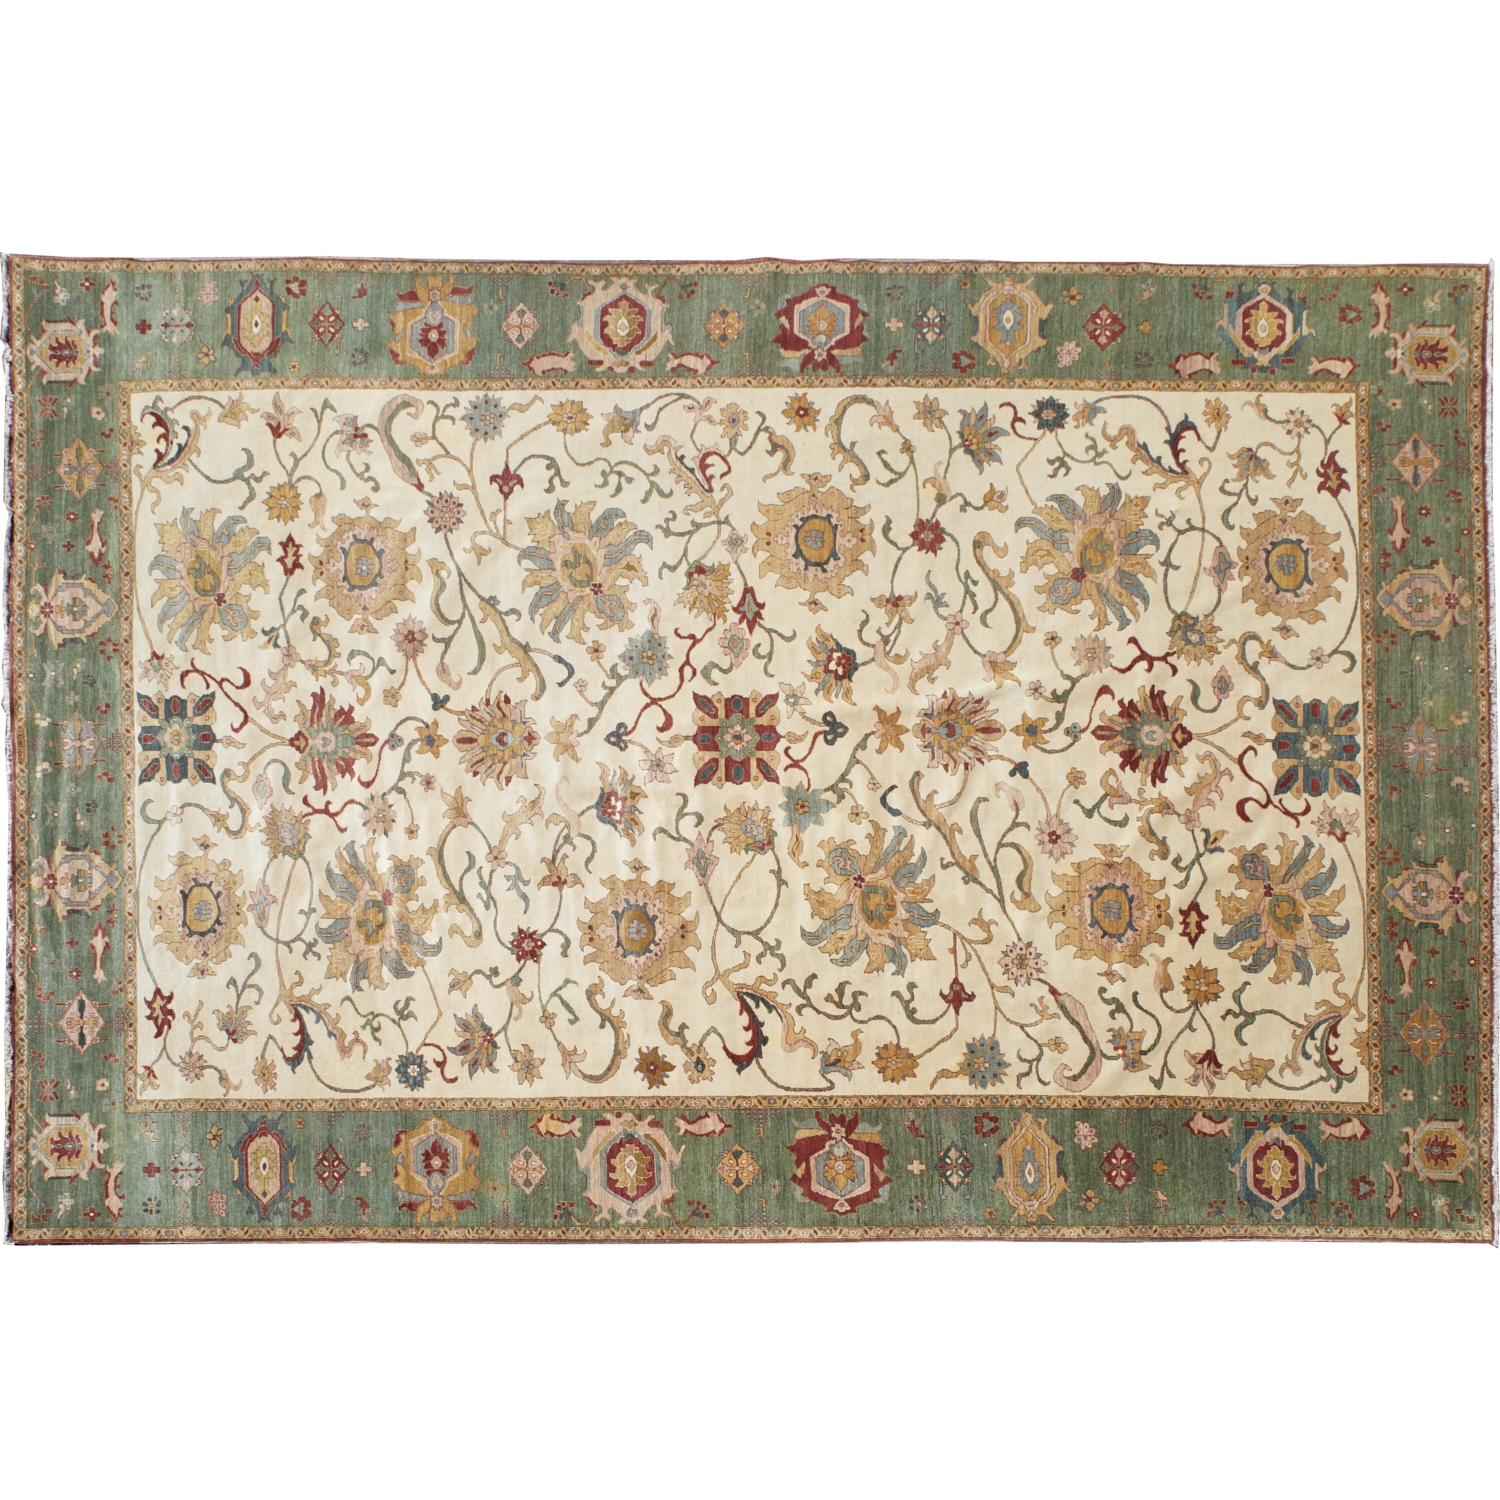 ROOM SIZE EGYPTIAN SULTANABAD CARPET 360e6d